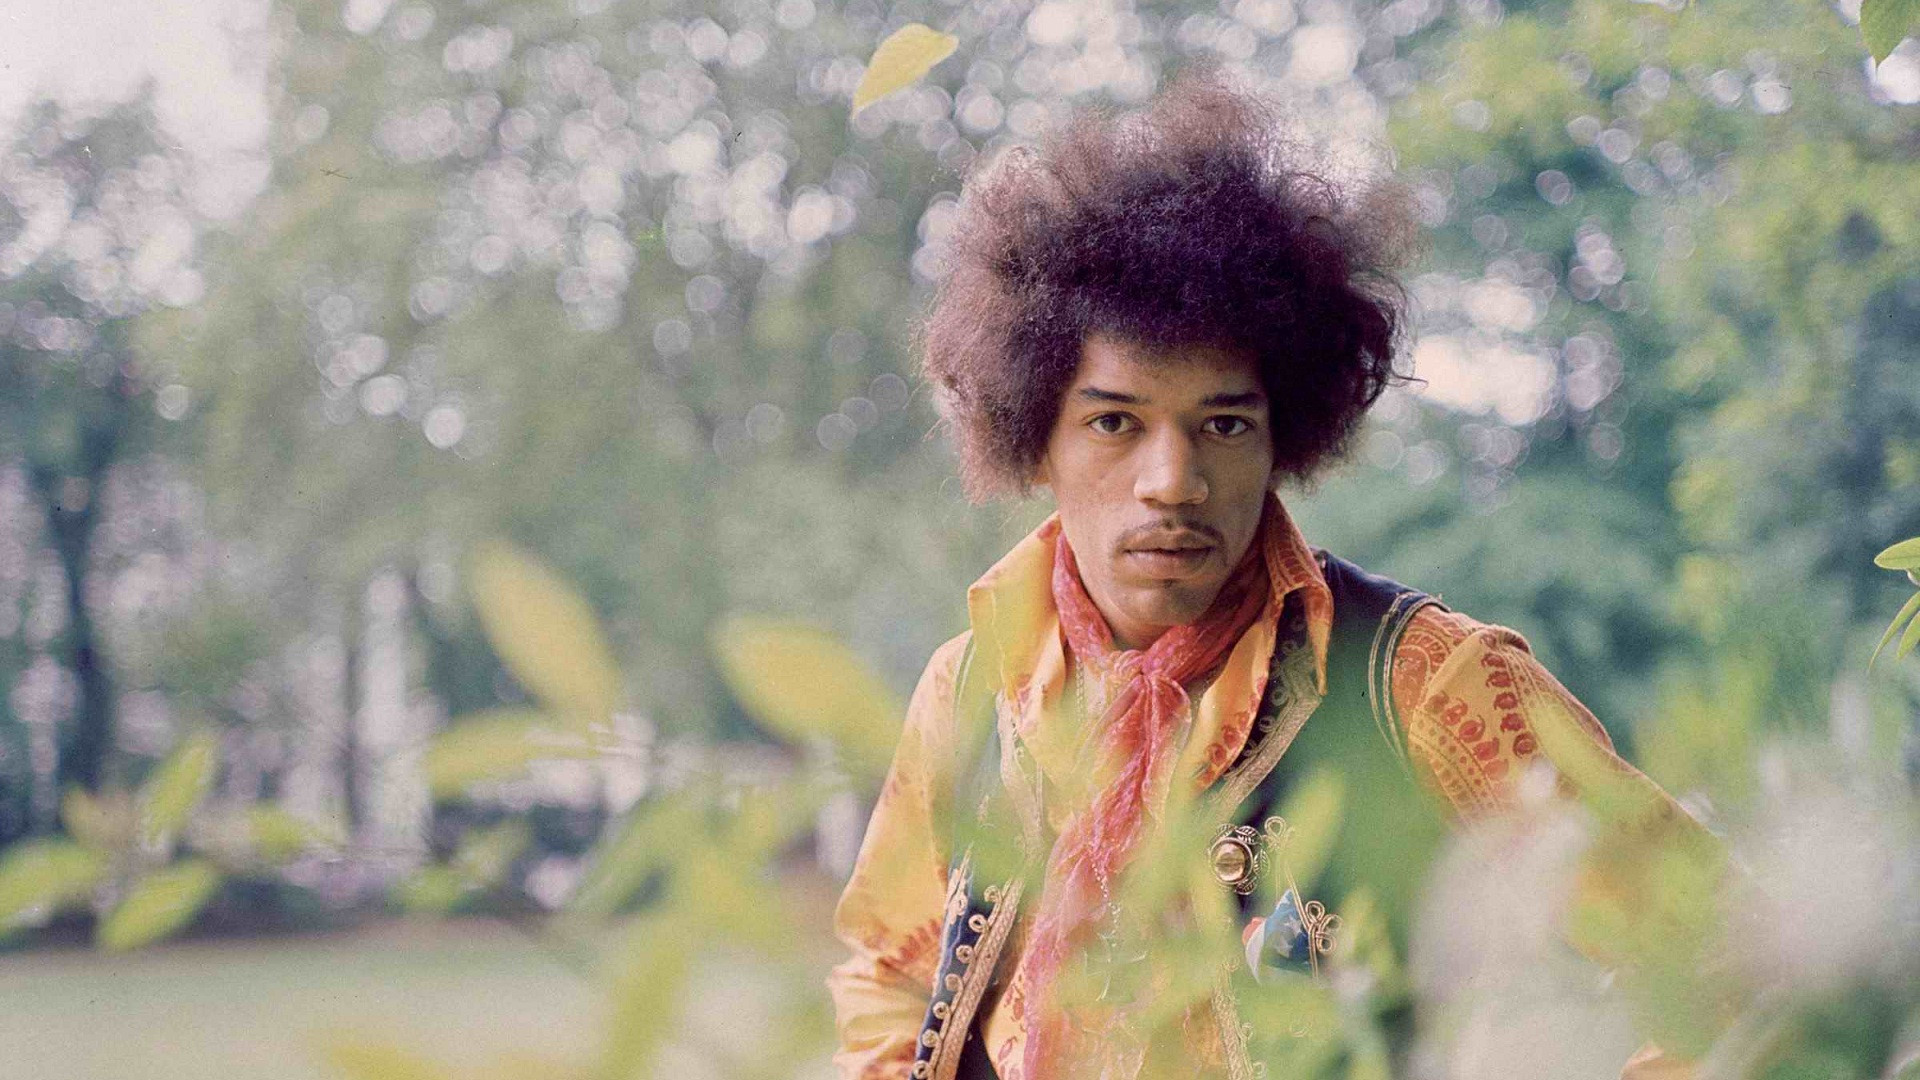 Are Ing Jimi Hendrix HD Wallpaper Color Palette Tags